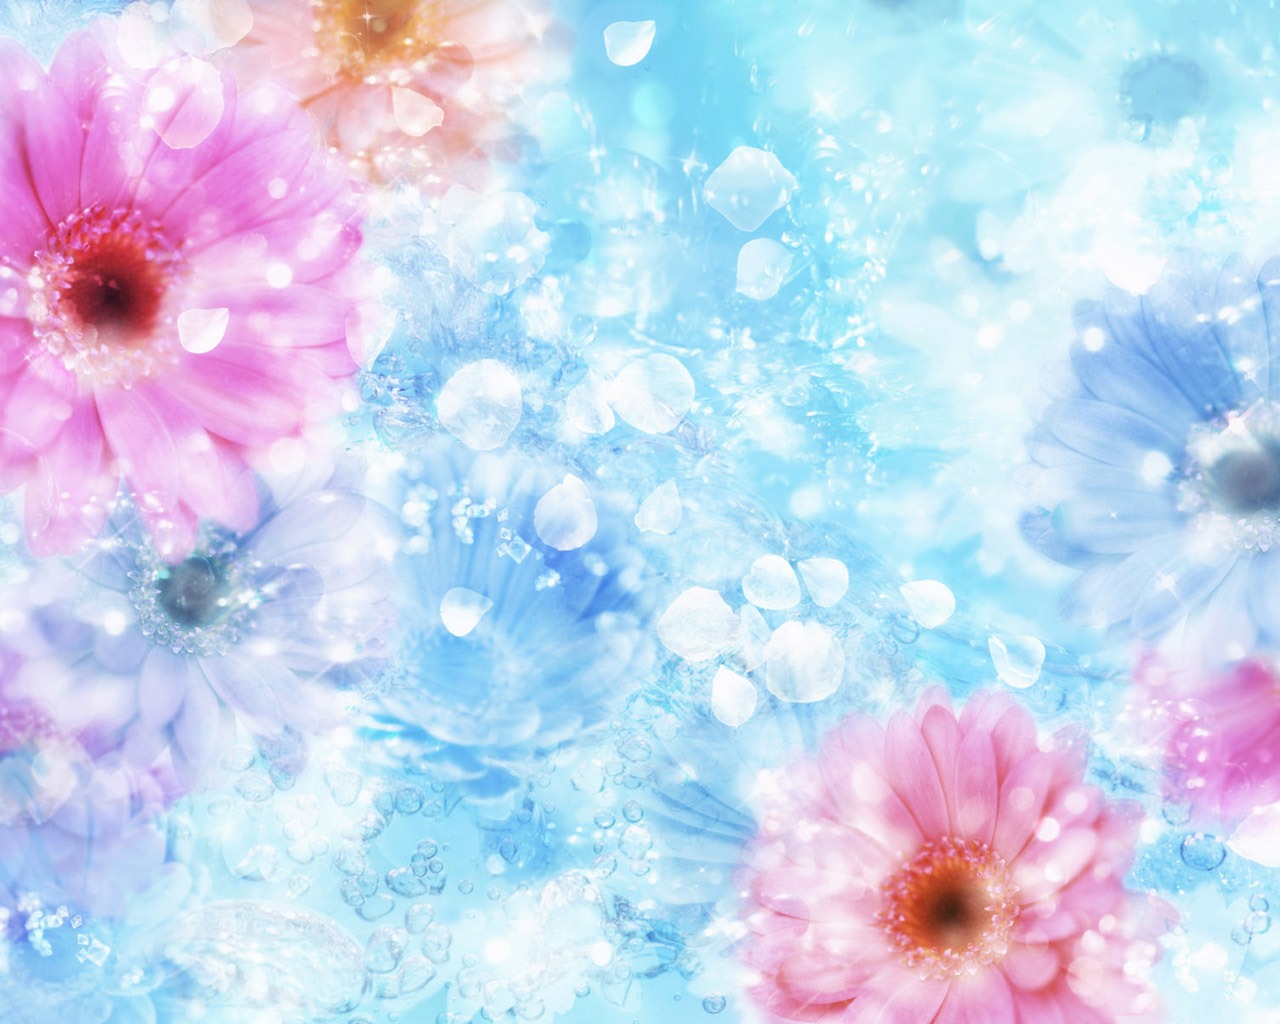 Fantasy CG Background Flower Wallpapers #13 - 1280x1024